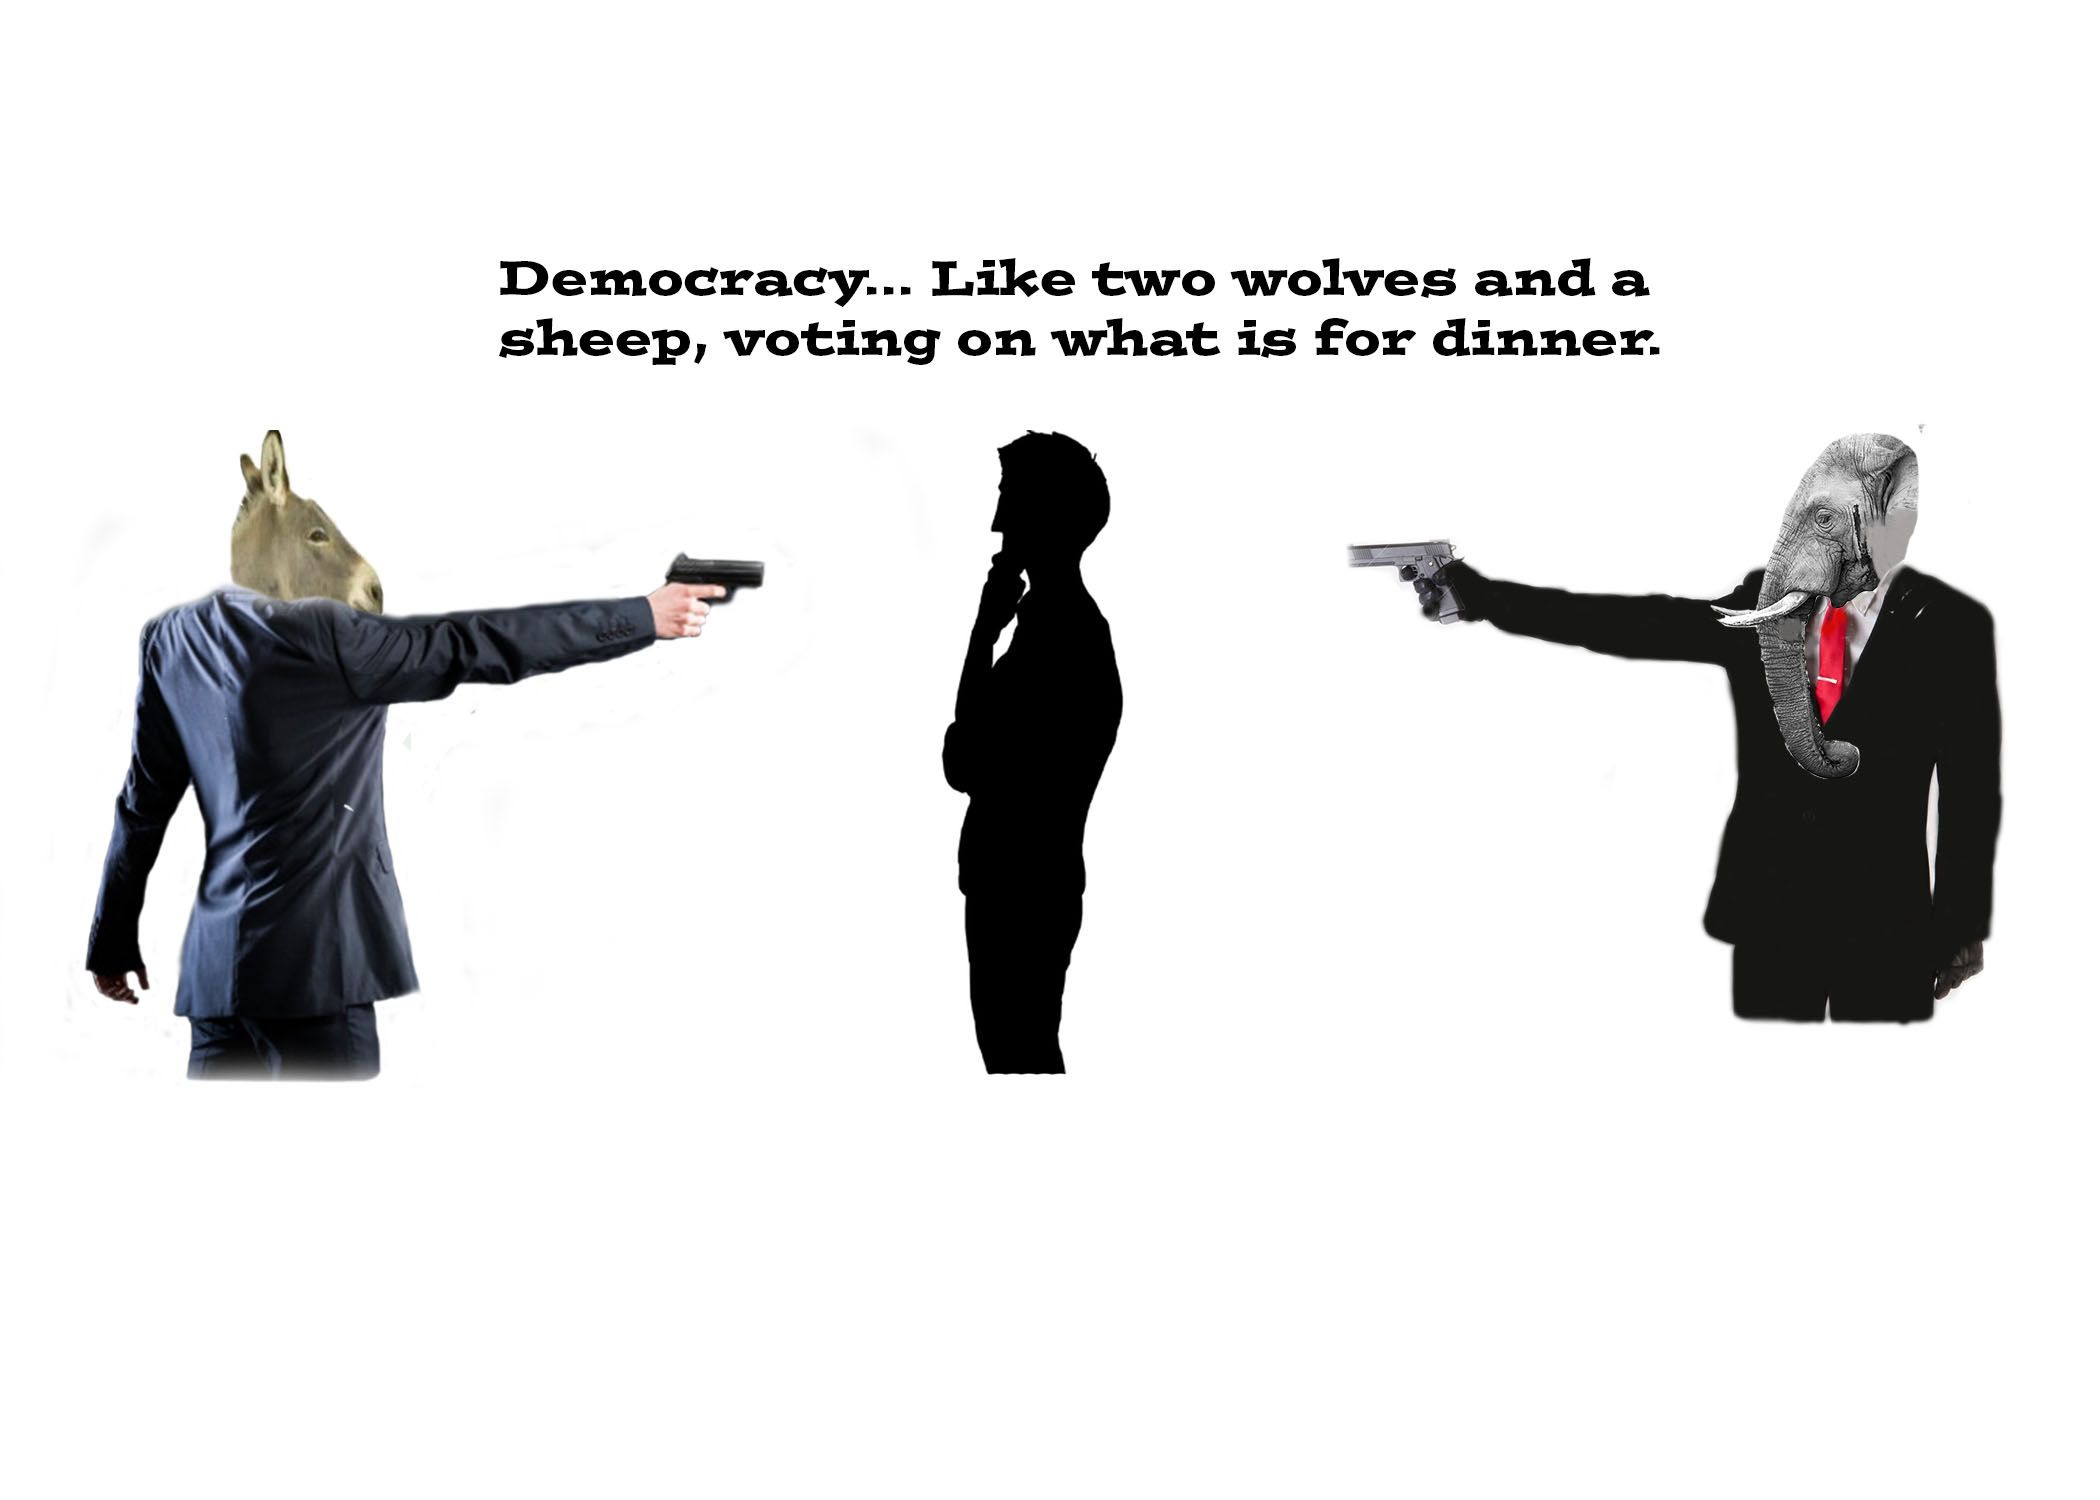 democracy two wolves and a sheep.jpg